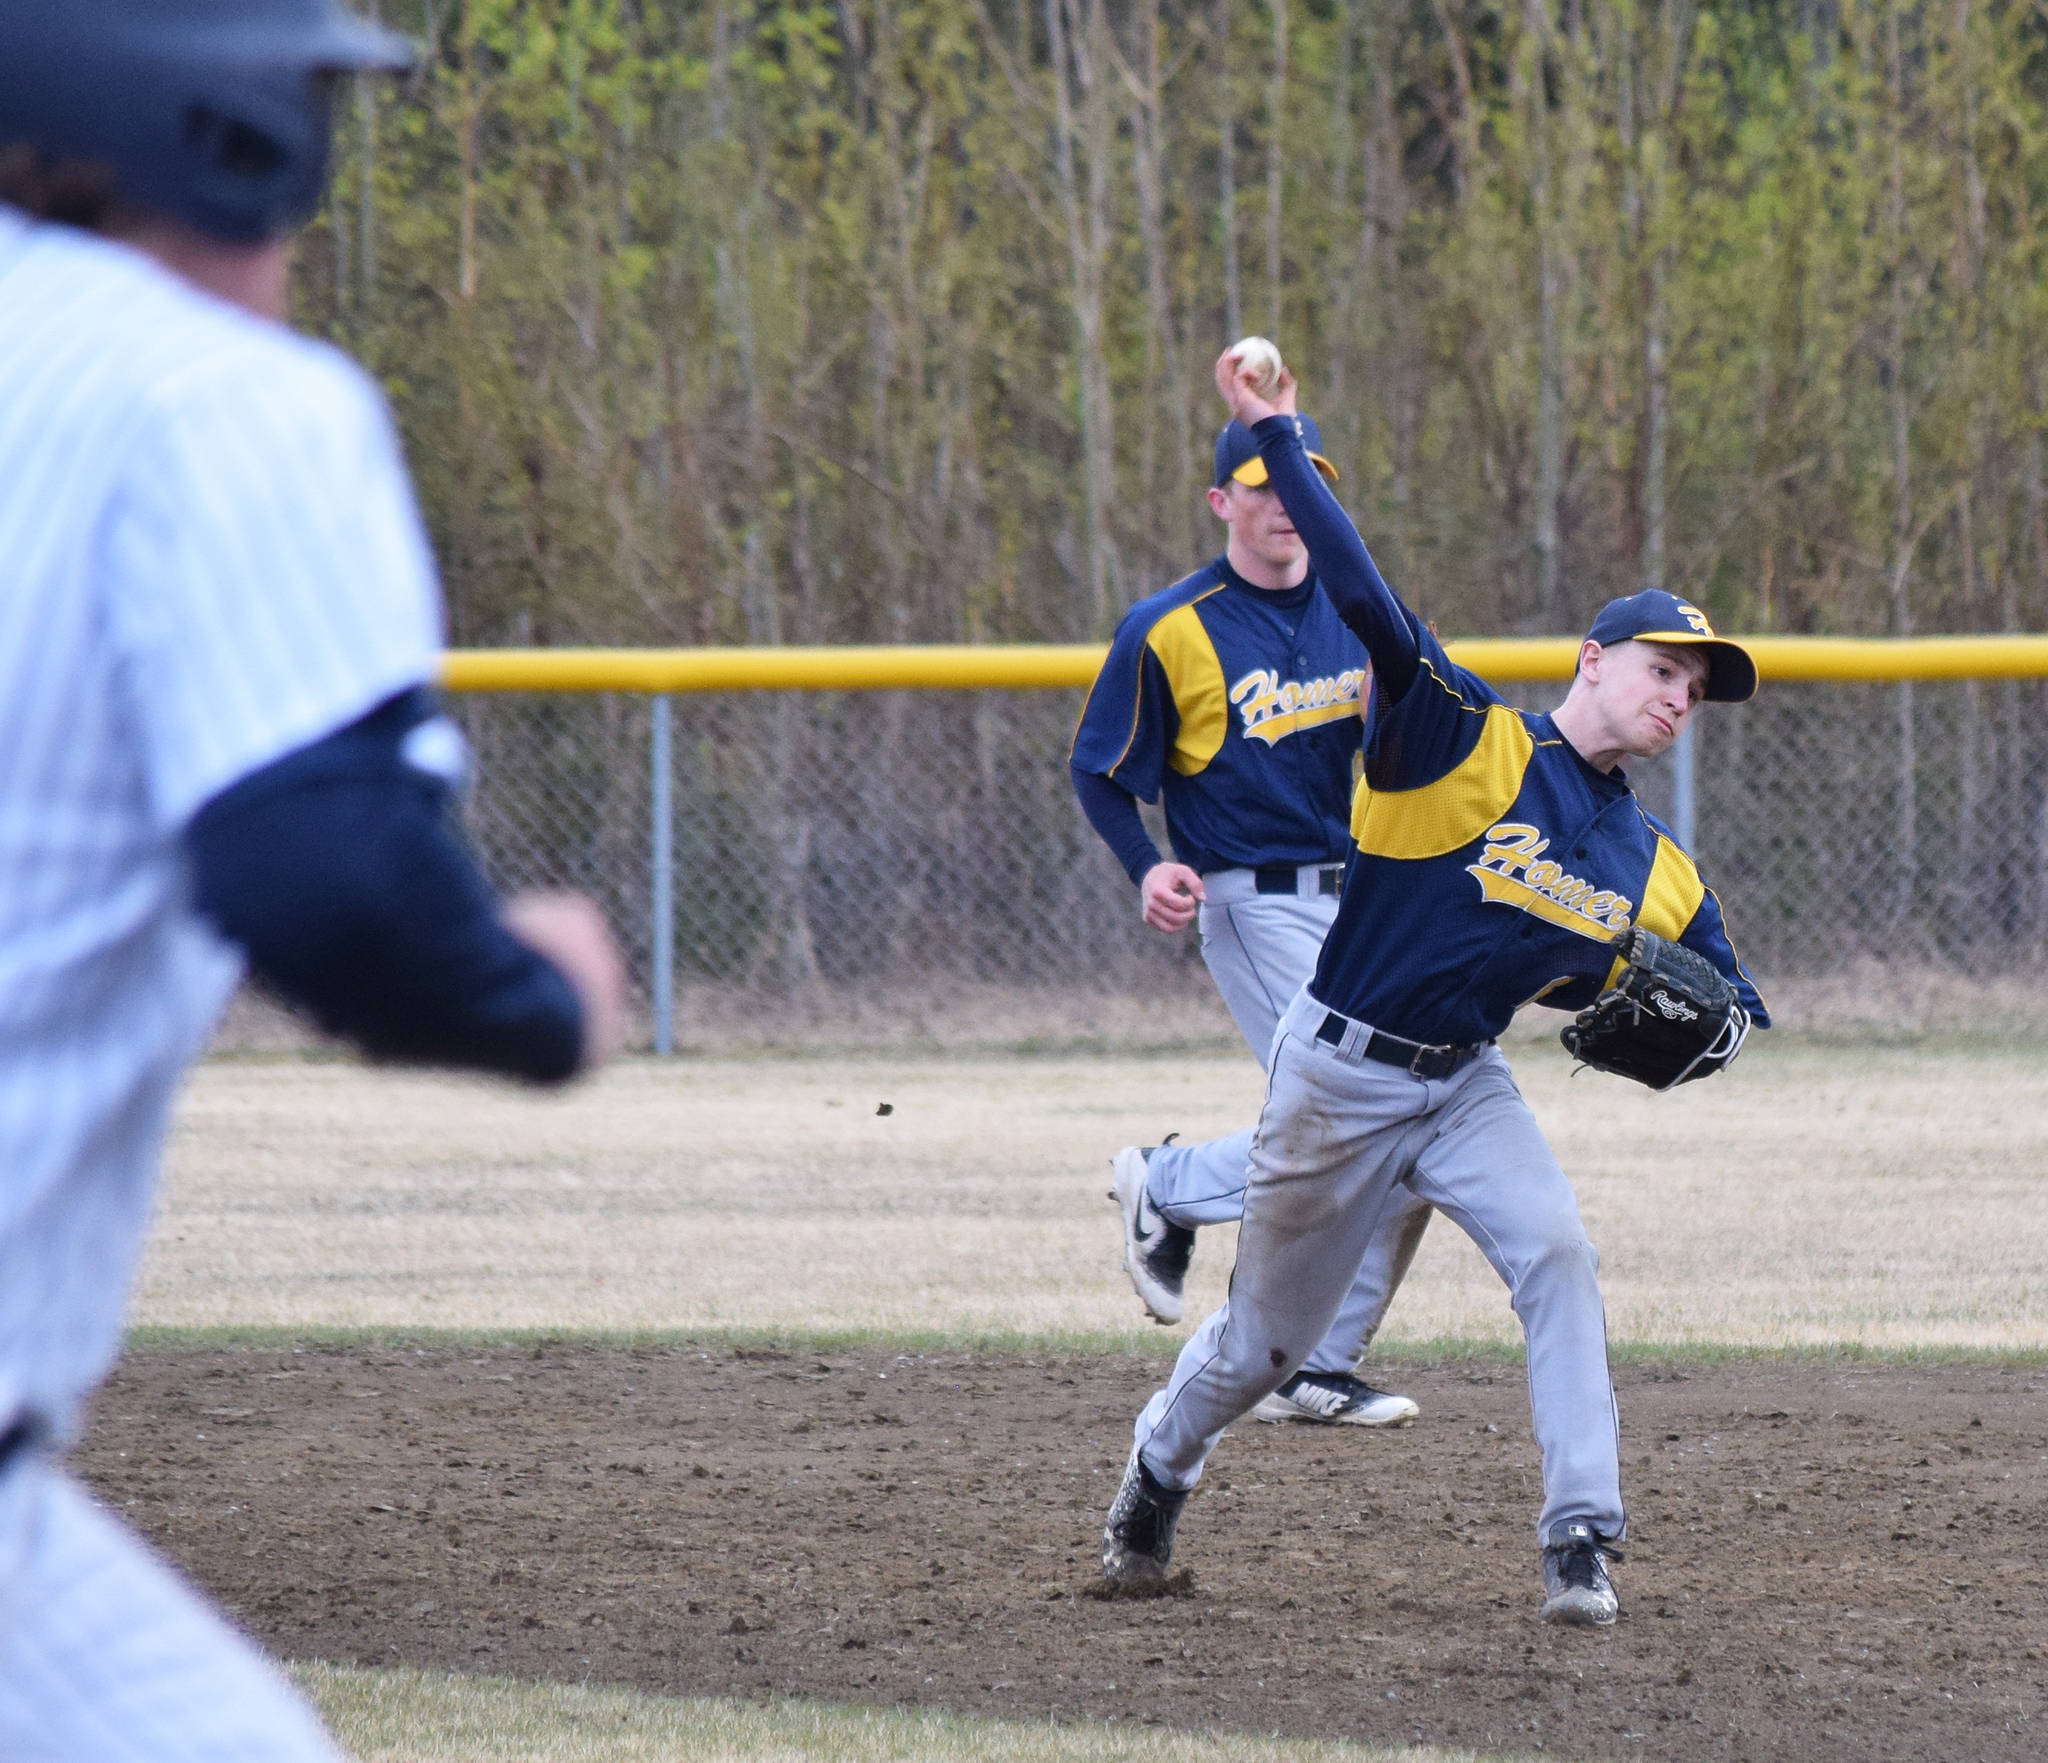 Homer second baseman Gabe Dash sends a groundball to first to record an out against Soldotna’s Jacob Boze, Wednesday, May 15, 2019, at the Soldotna Little League Fields in Soldotna, Alaska. (Photo by Joey Klecka/Peninsula Clarion)